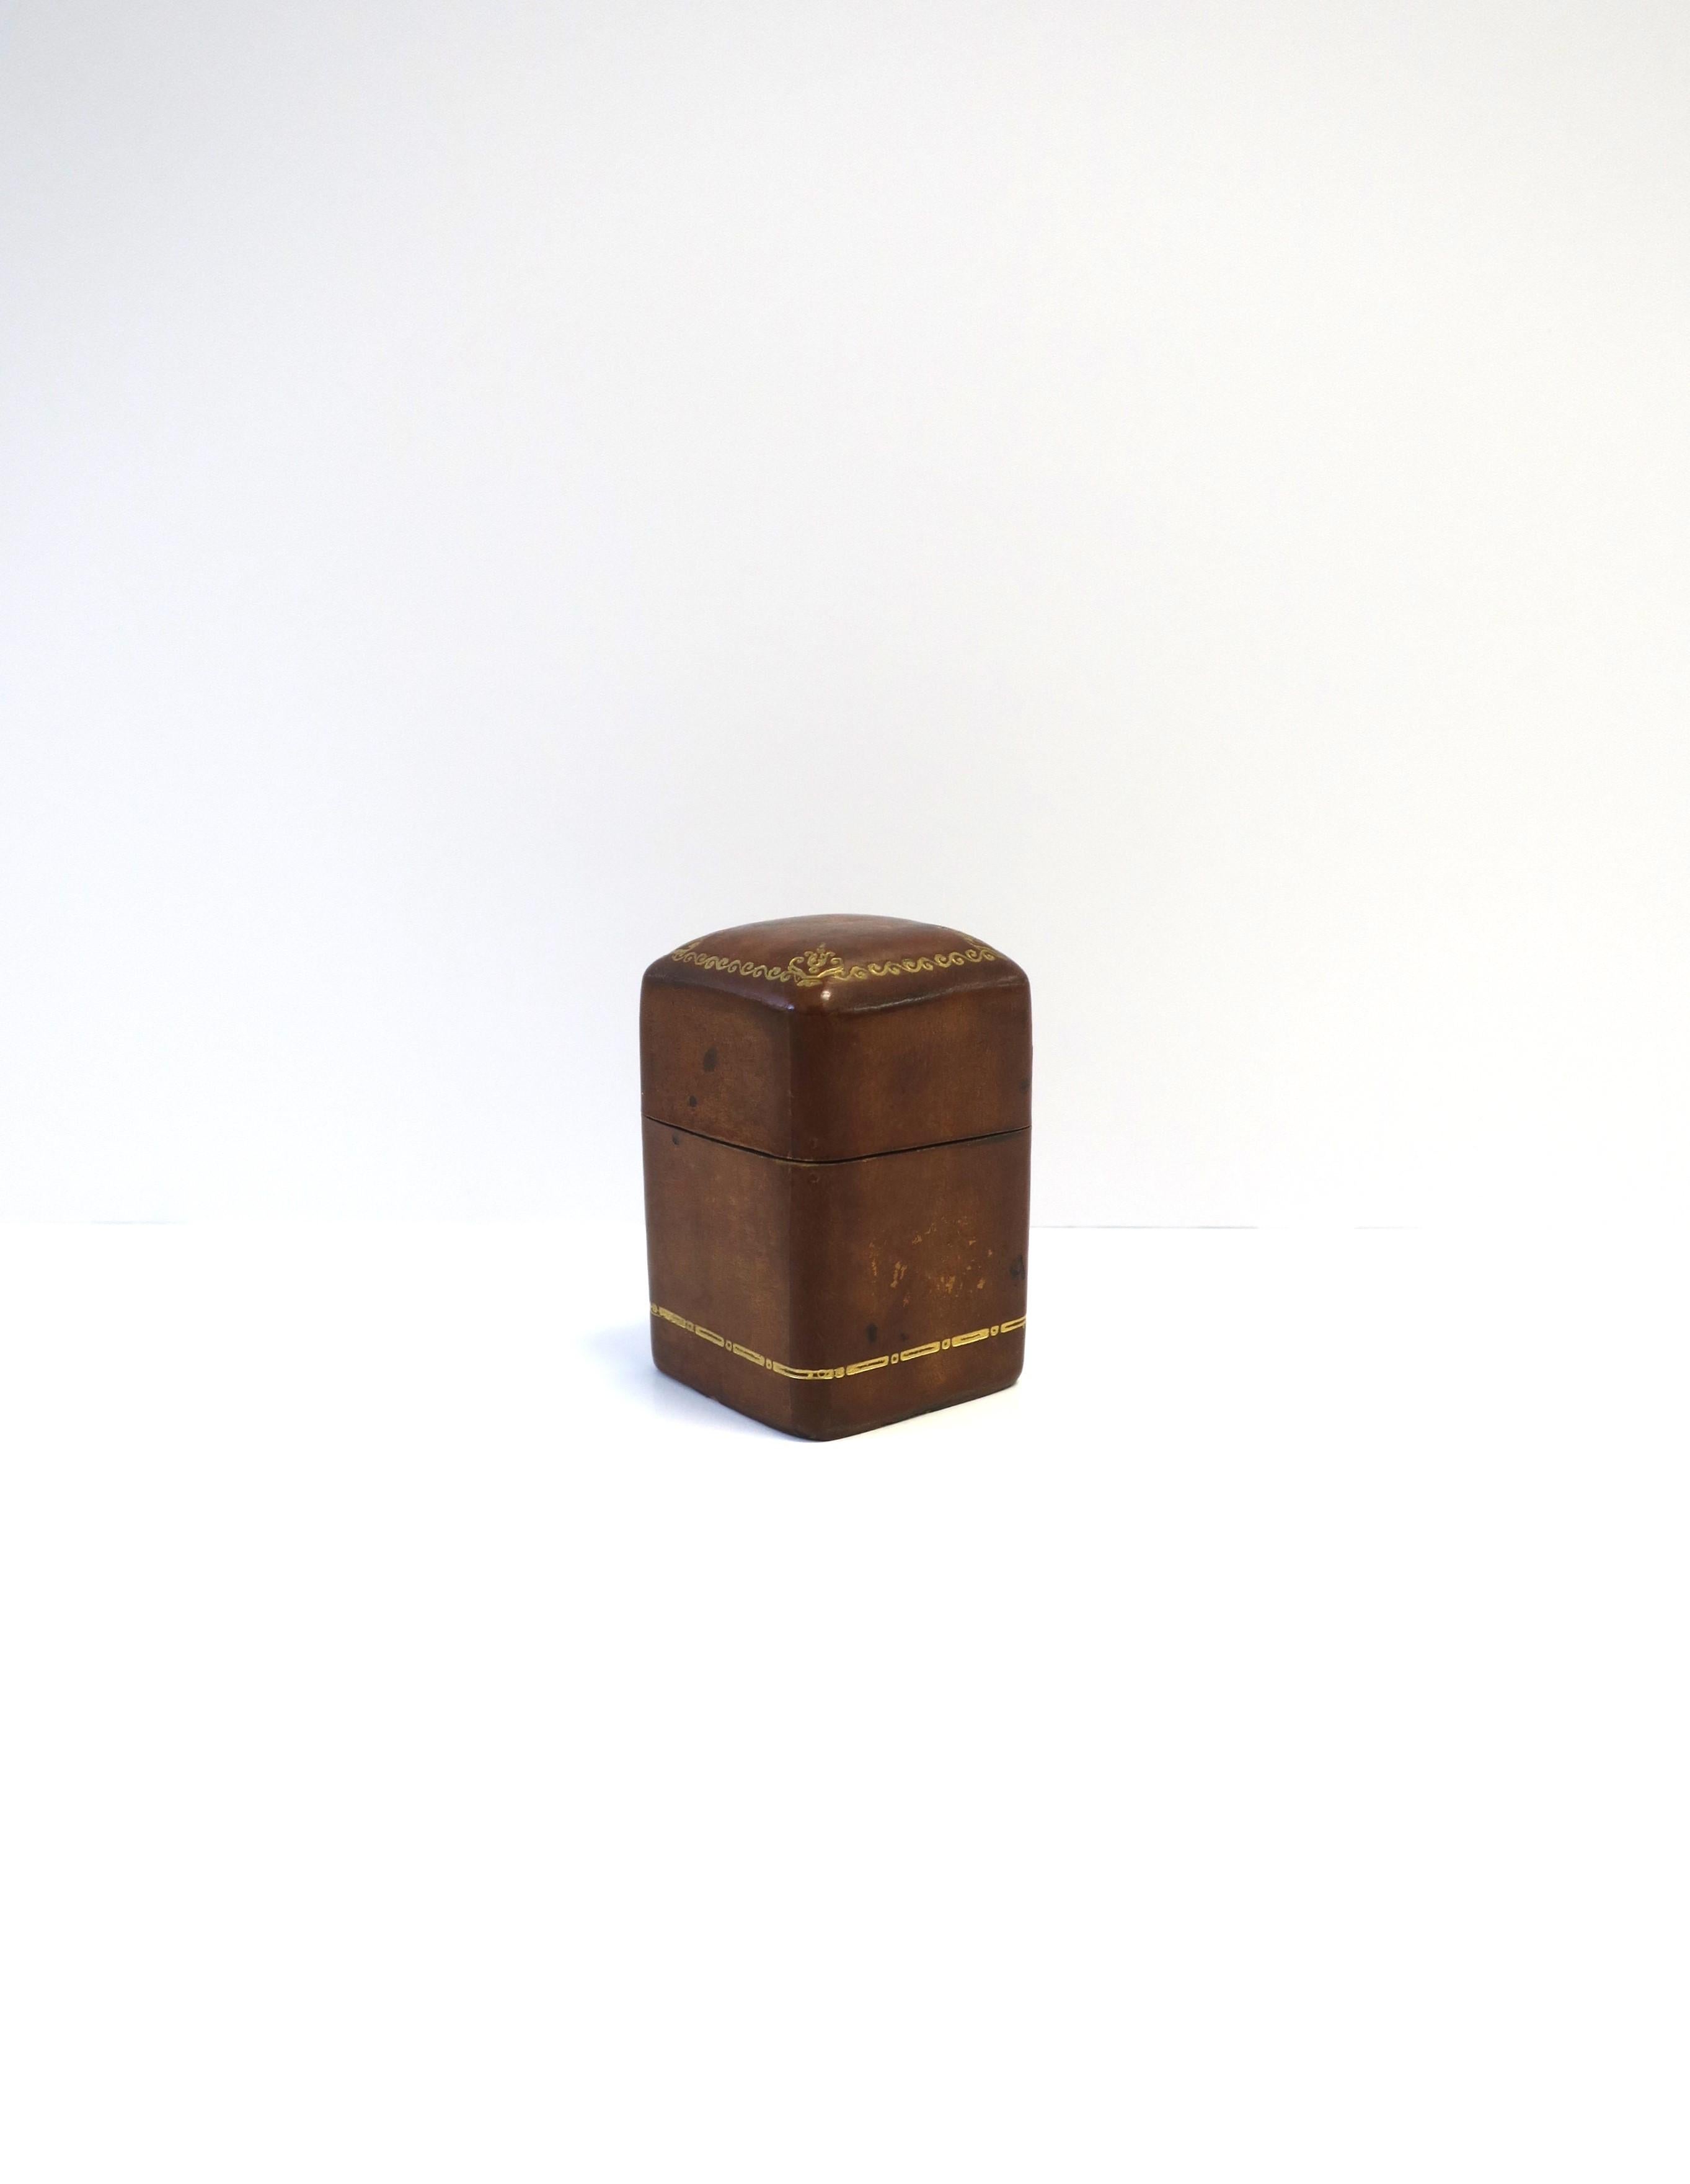 A beautiful Italian leather and gold embossed matchstick holder box and match striker, circa mid-20th century, Italy. This Italian leather piece has gold embossed detail on top lid and around bottom base. Striker area on bottom. Great for tobacco